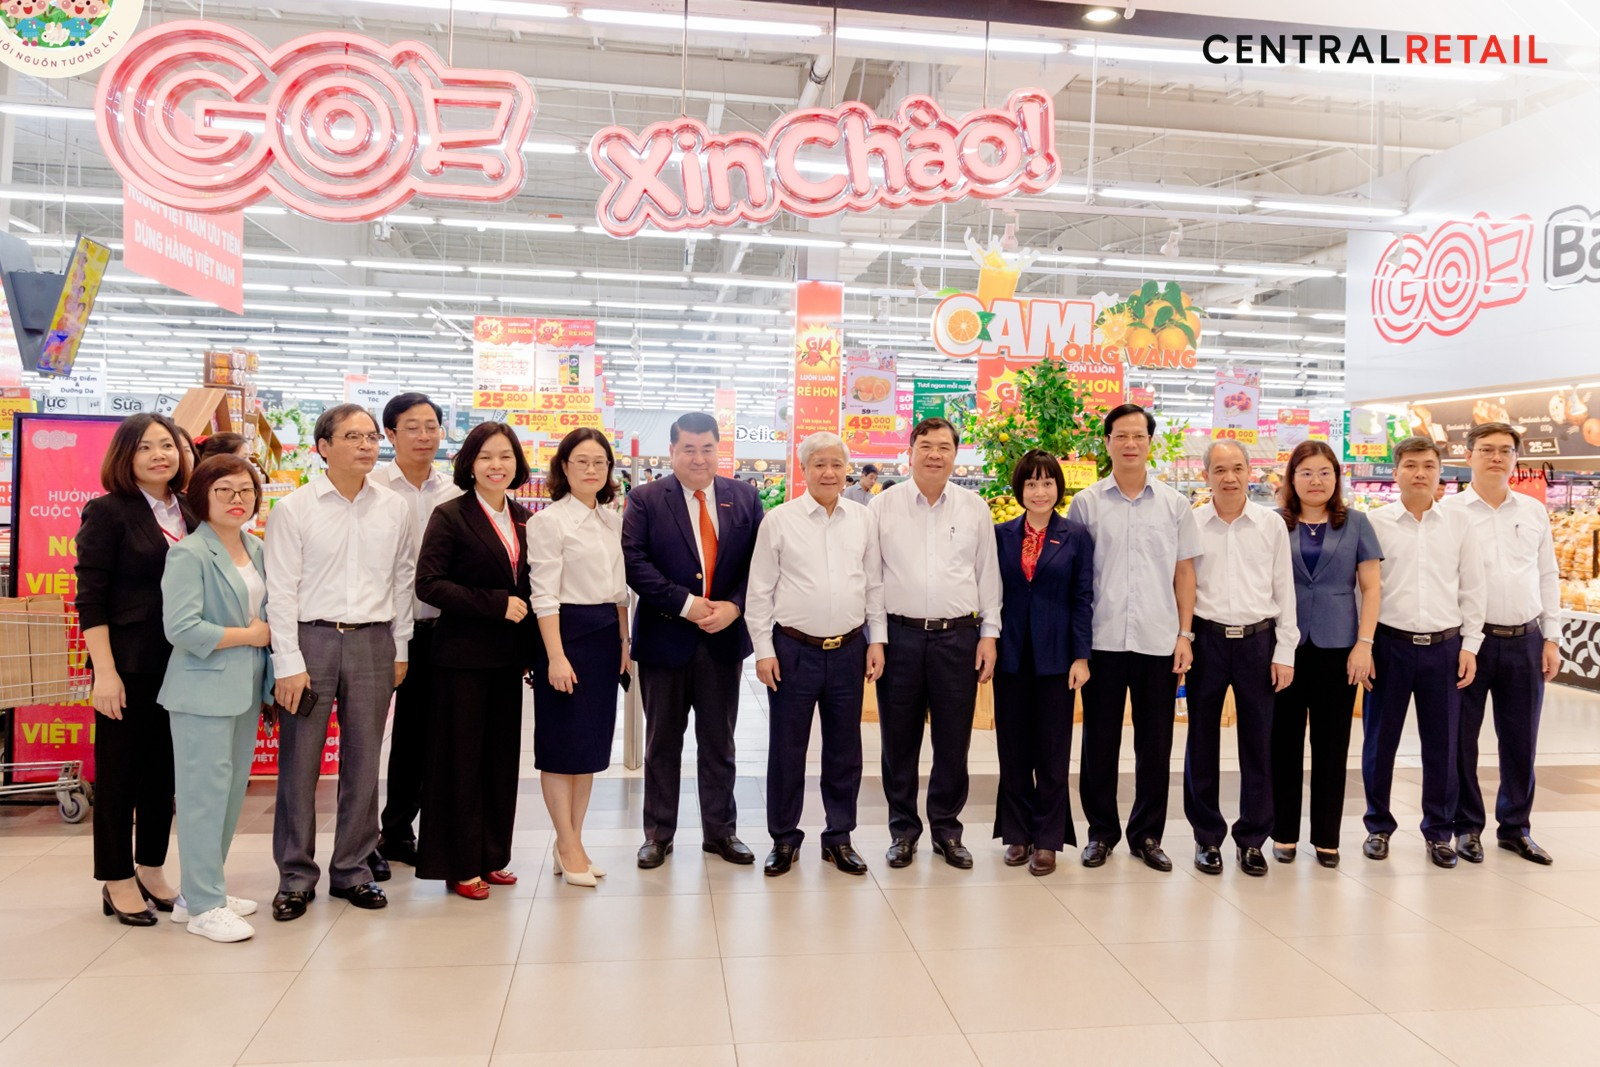 Central Retail Vietnam welcomed a delegation to visit GO! Nam Dinh to discuss the “Vietnamese People Give Priority to Using Vietnamese Goods” campaign